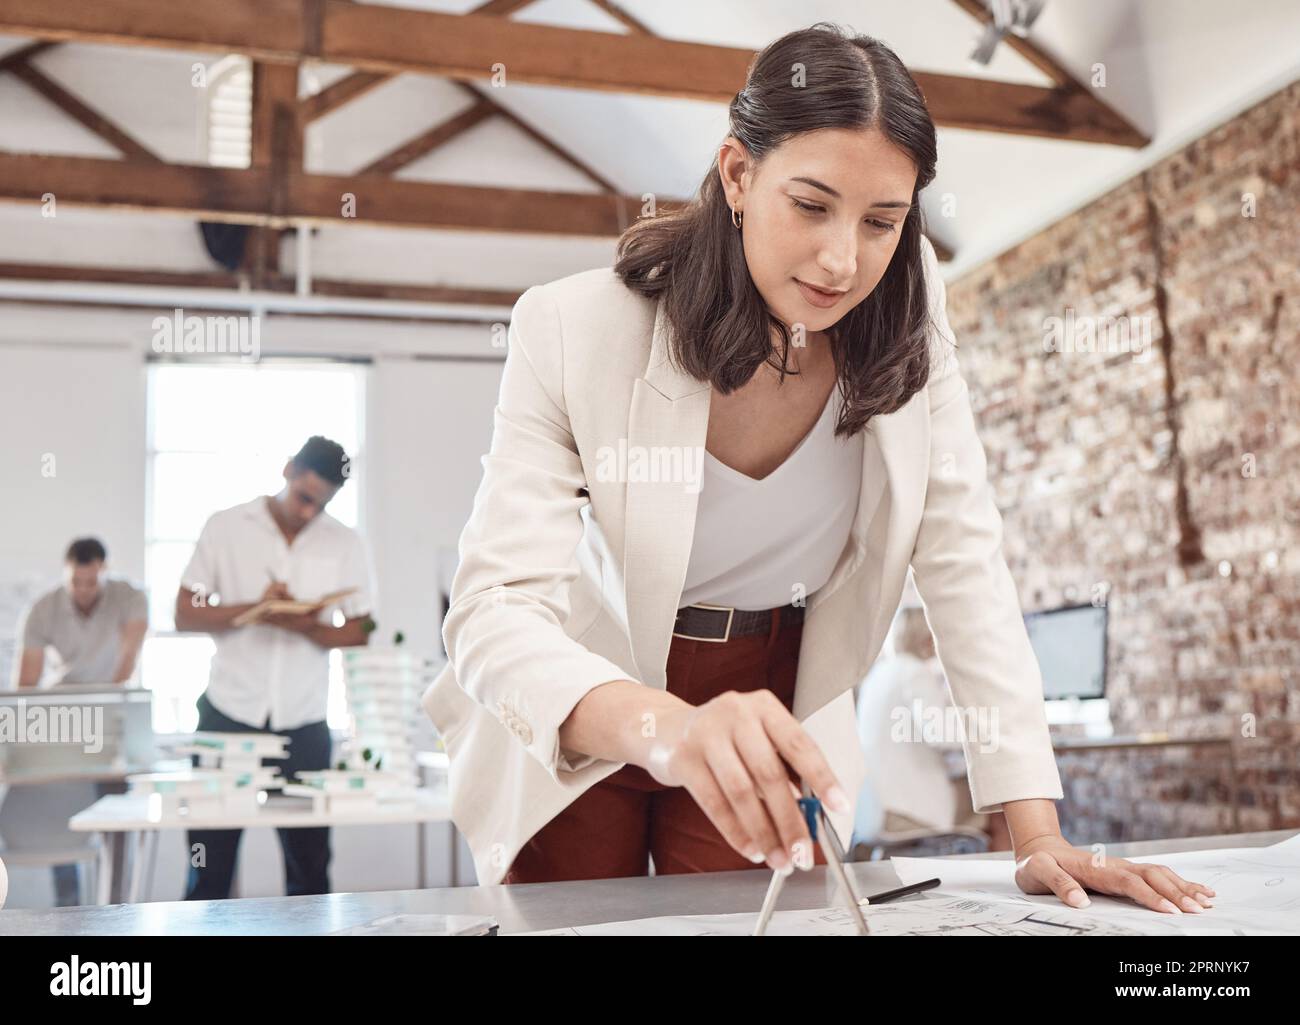 Architect, blueprint and design with a woman engineer working on a plan in her office at work. Construction, designer and architecture with a female creative working on building plans for development Stock Photo